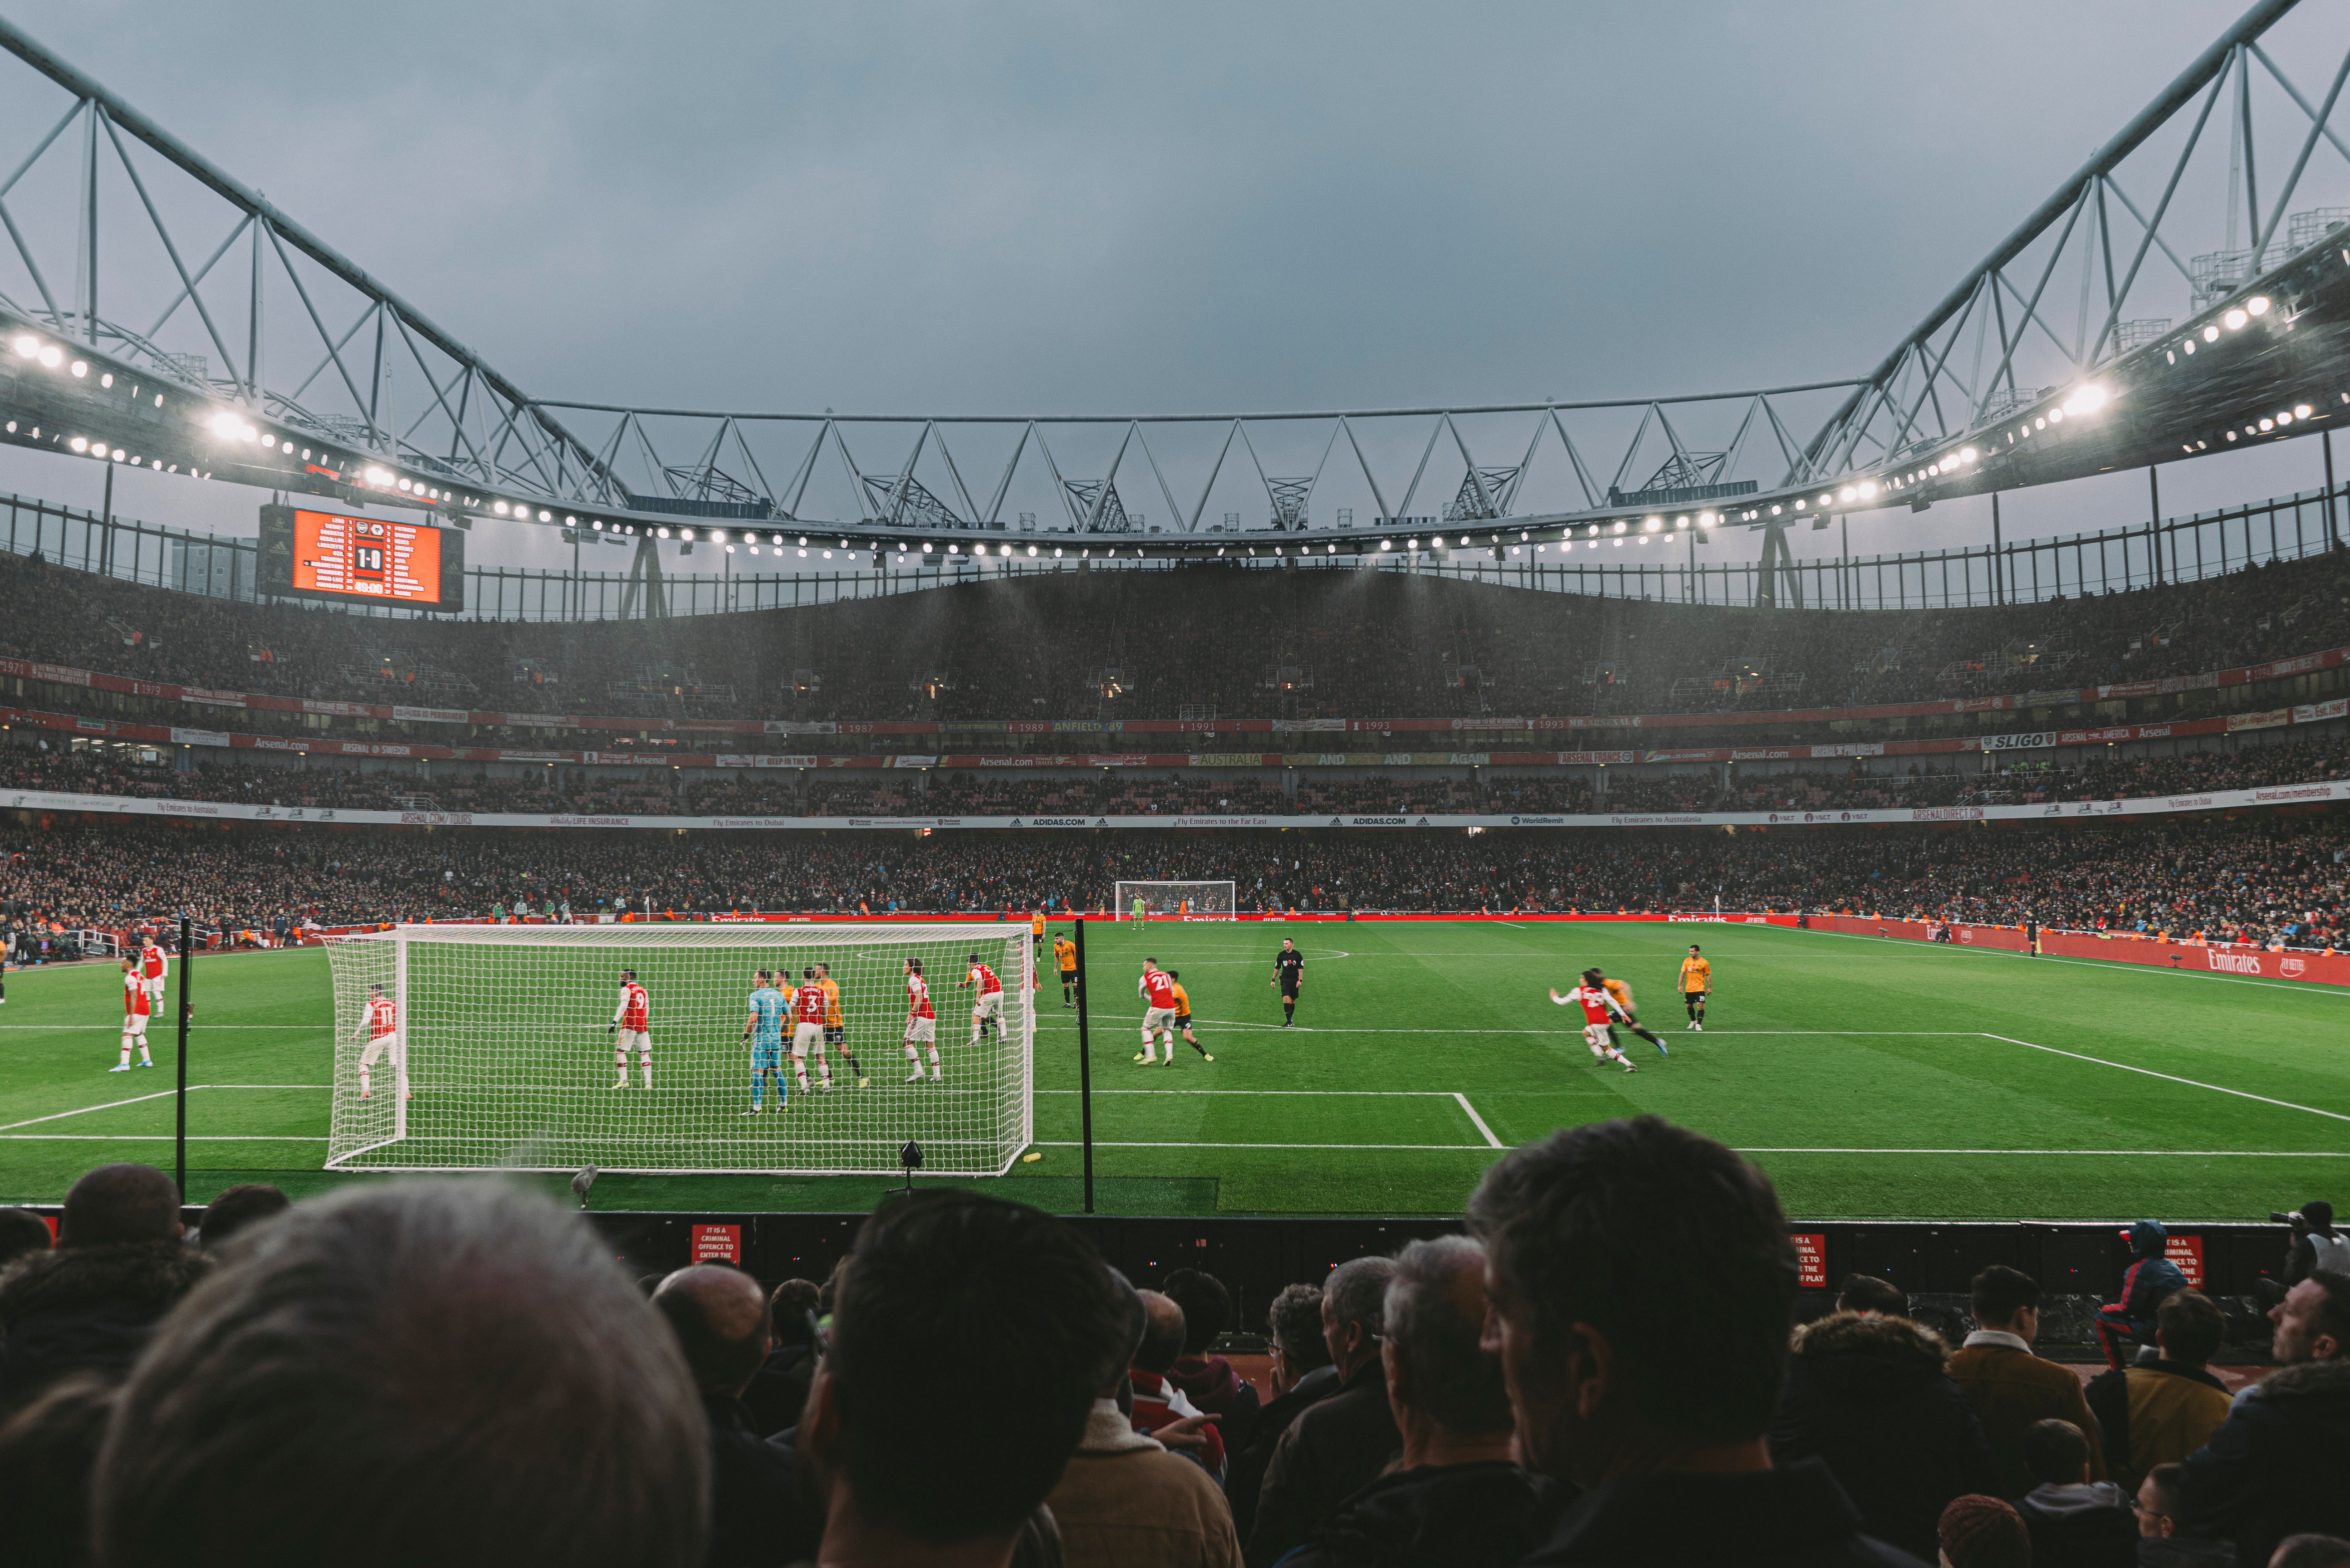 Football matches last for 90 minutes and season can have over 70 games. Photo by Nelson Ndongal from Unsplash